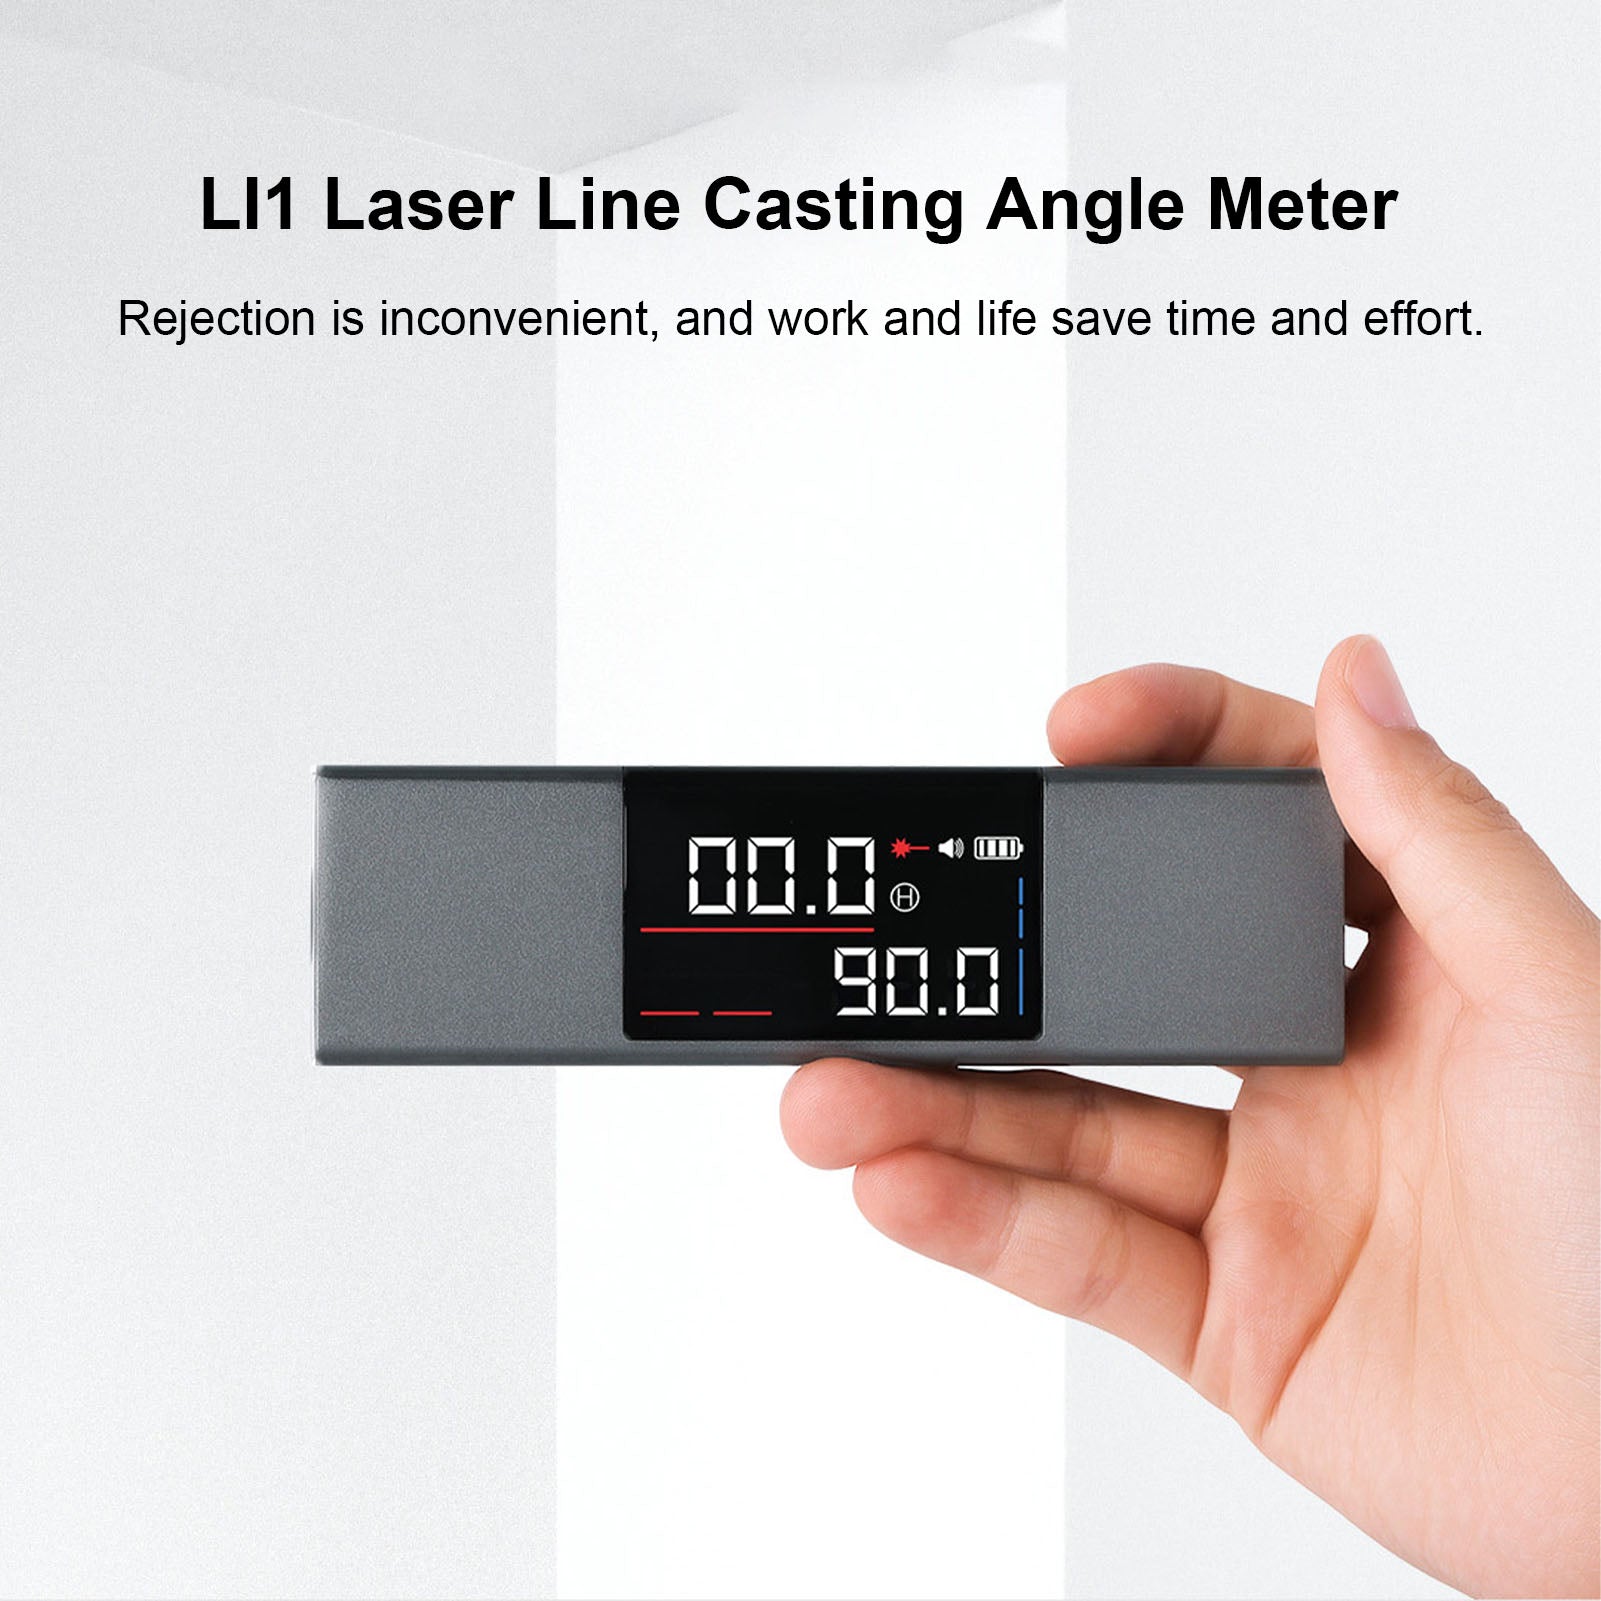 Suitable For Xiaomi Duke Li1 Laser Casting Angle Meter Decoration Multi-Functional Handheld Electronic Digital Display Meter Angle Ruler Emporium Discounts 5 Daily Products Or Gadgets 